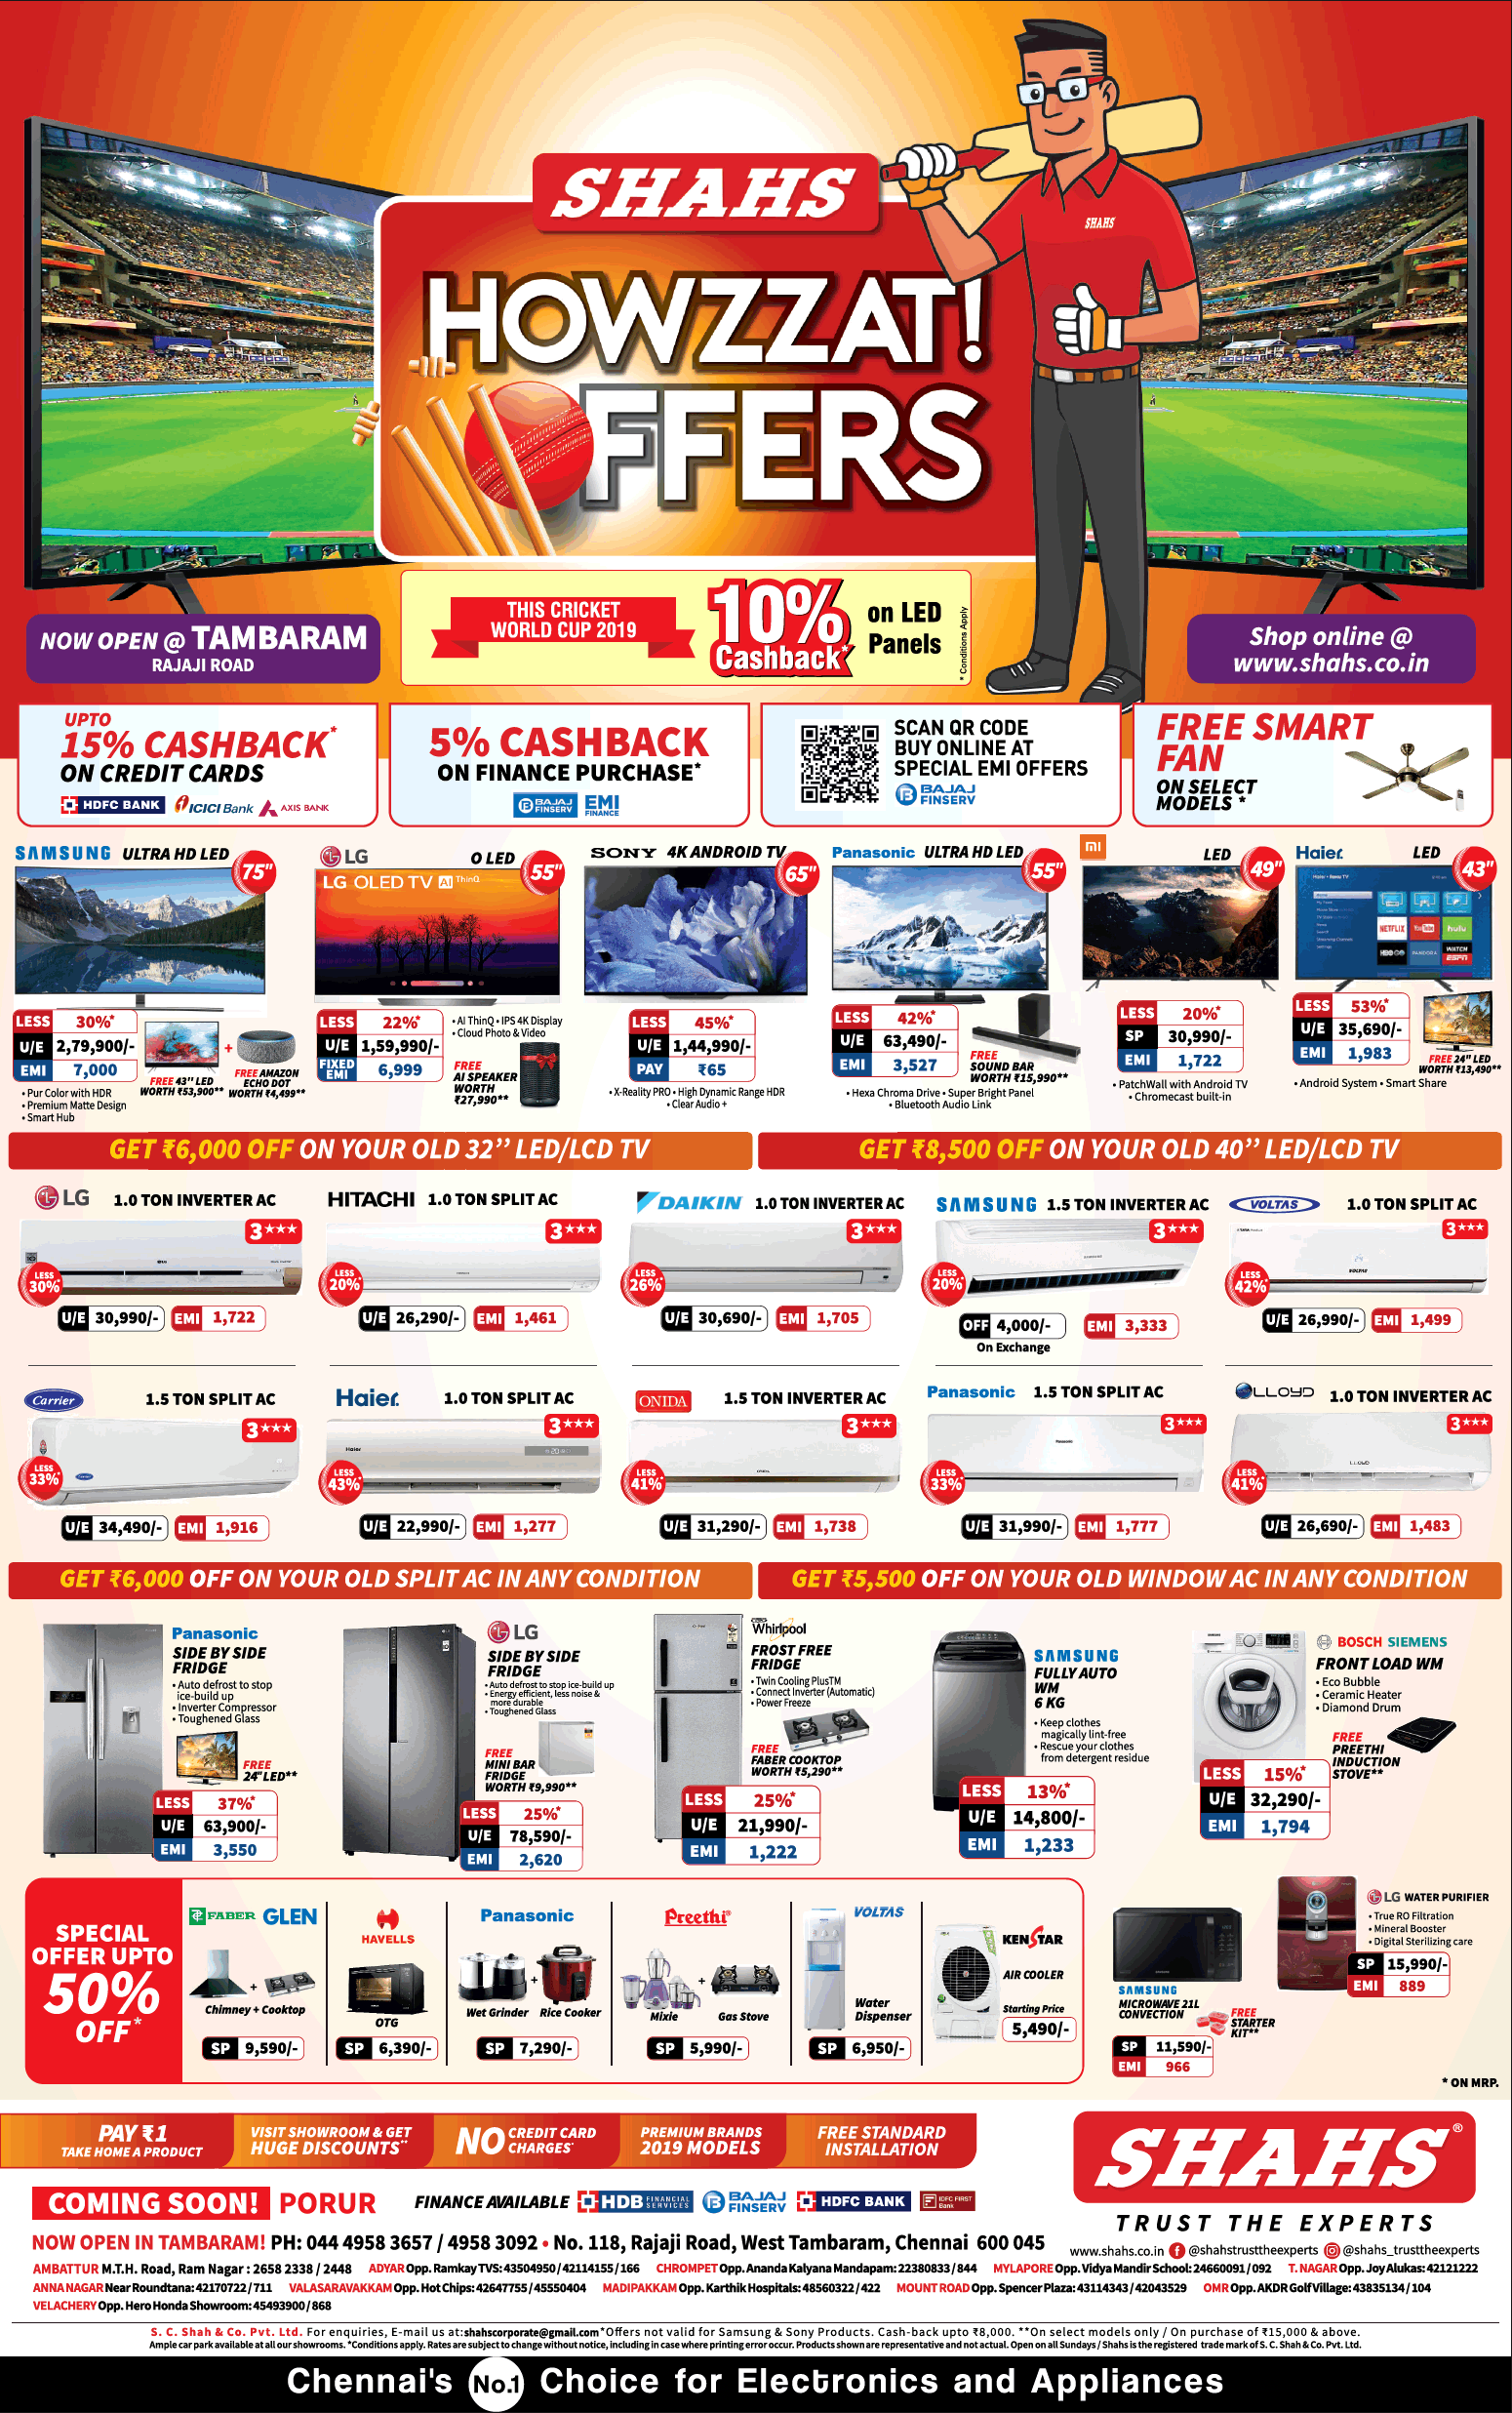 shahs-electronics-howzzat-offers-ad-chennai-times-08-06-2019.png